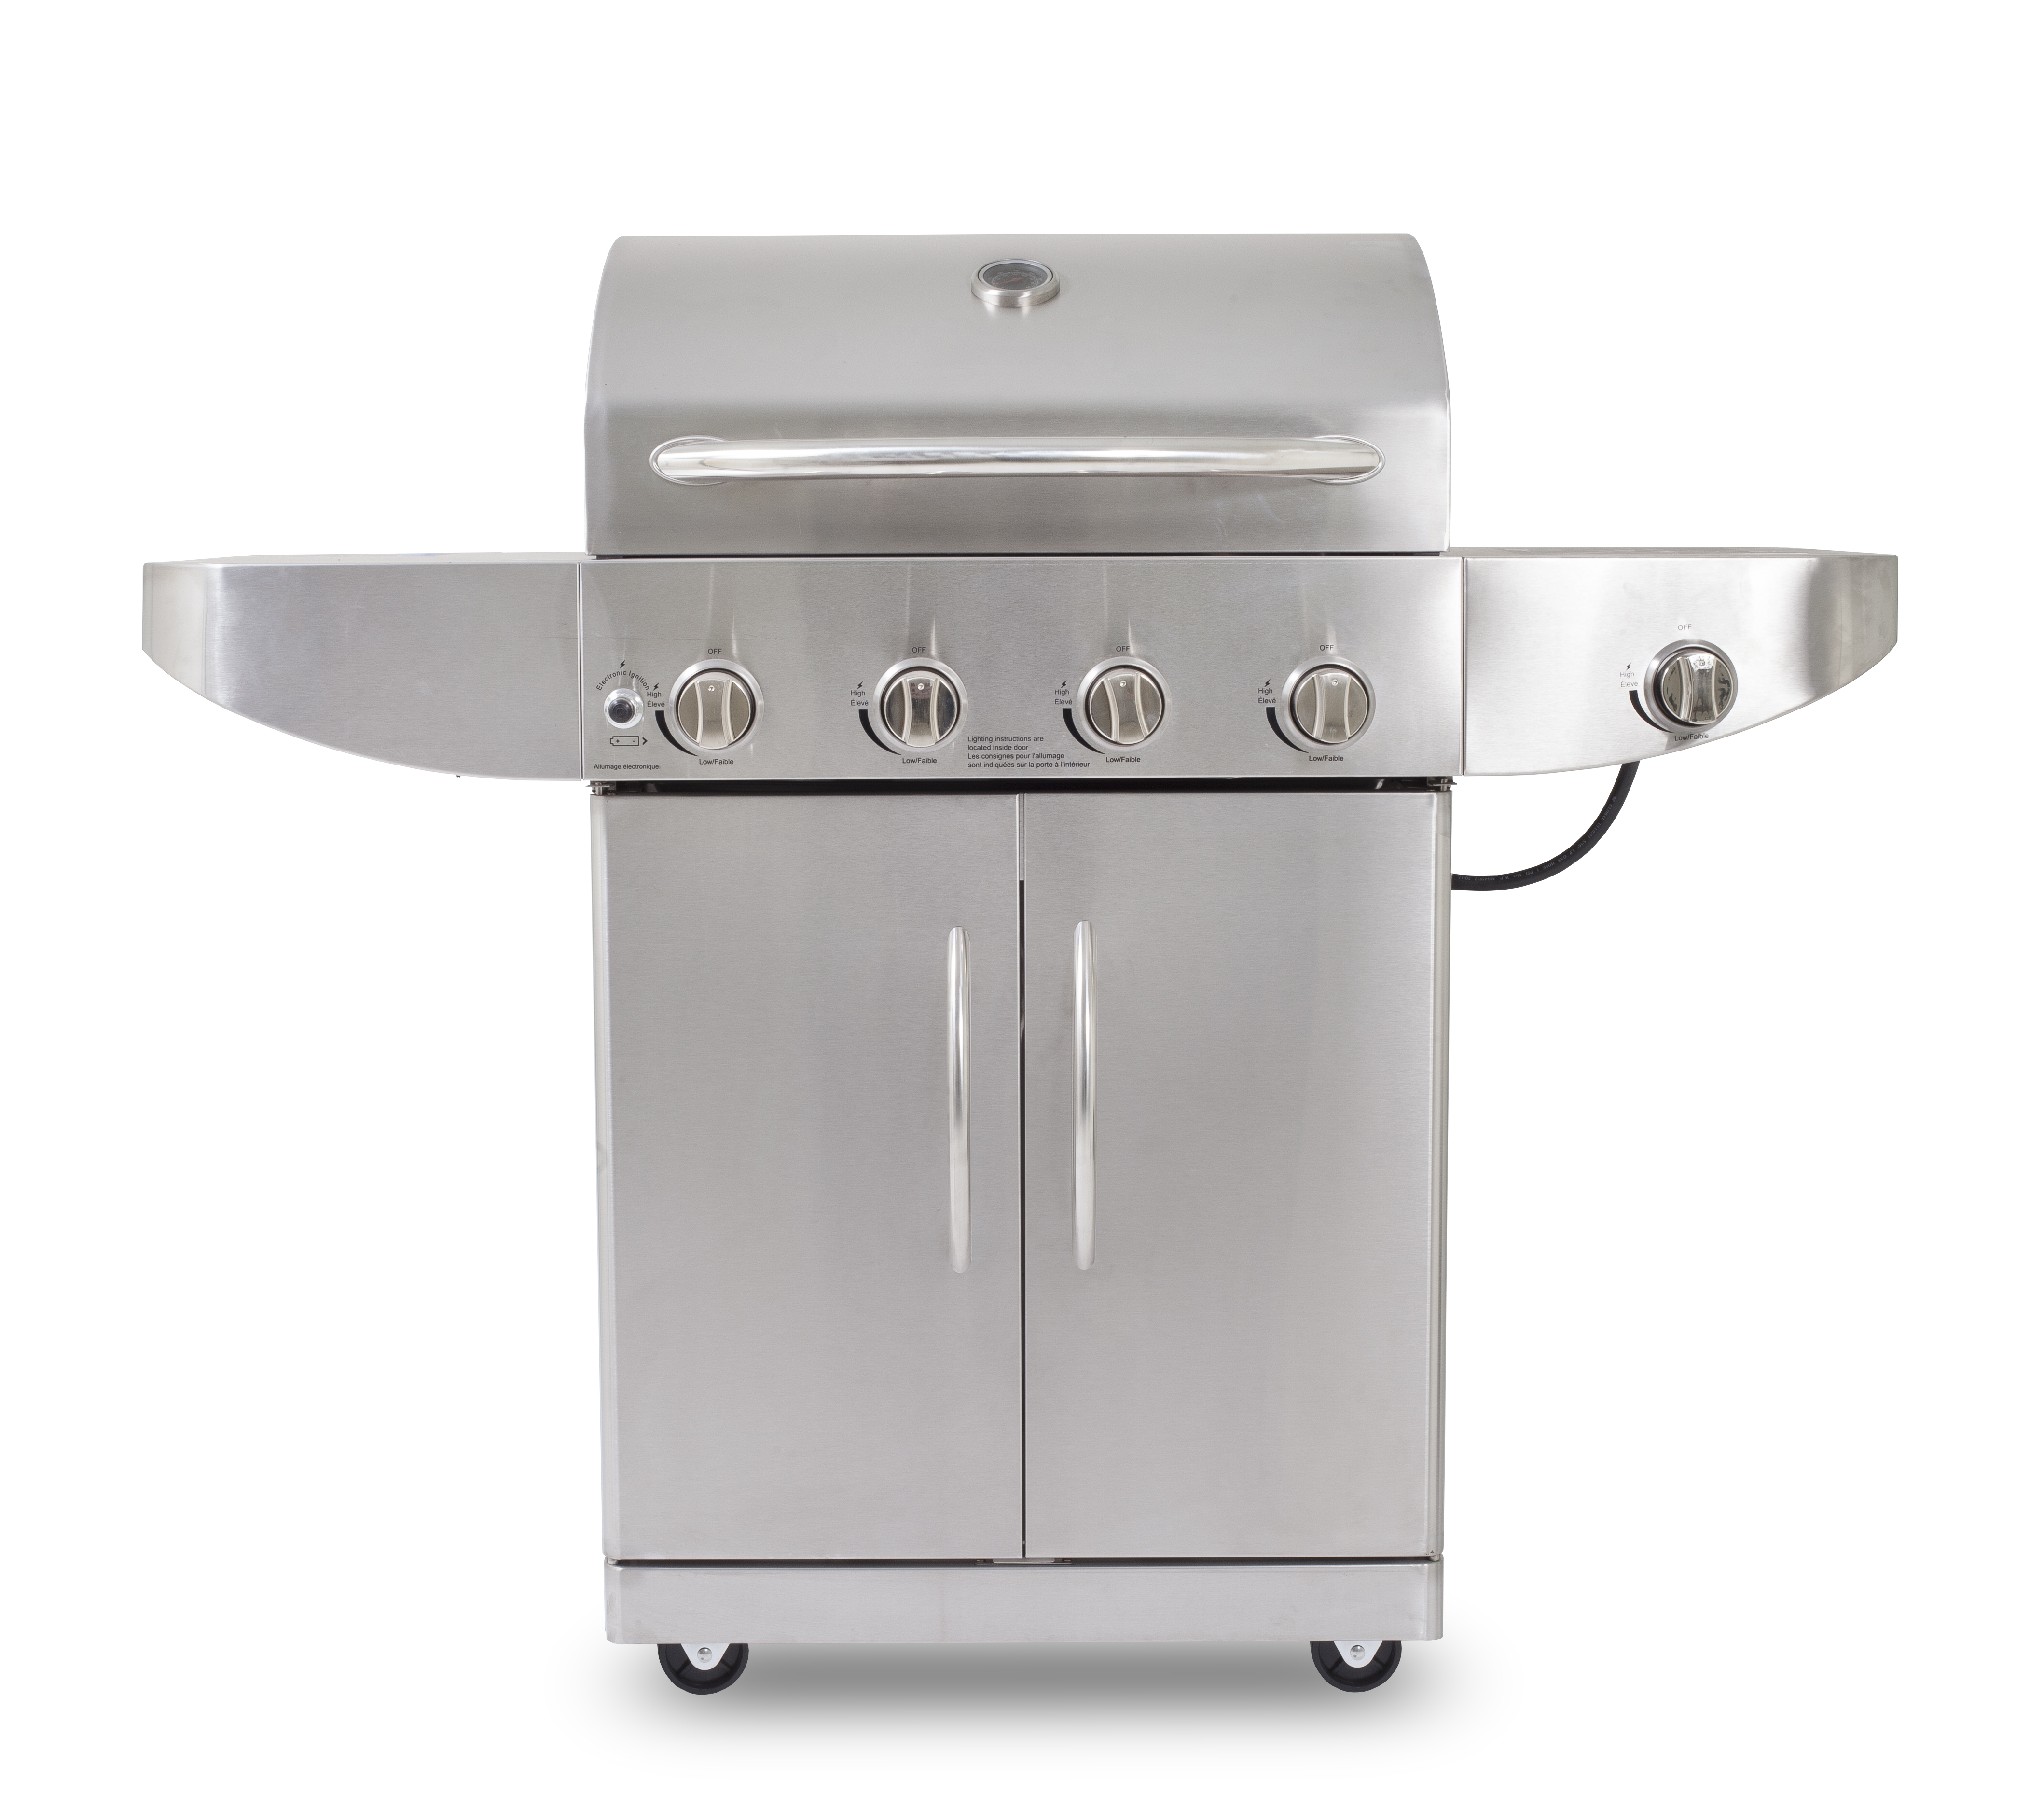 Pit Boss Stainless Steel 4-Burner Barbecue Gas Grill with Side Burner - image 1 of 4